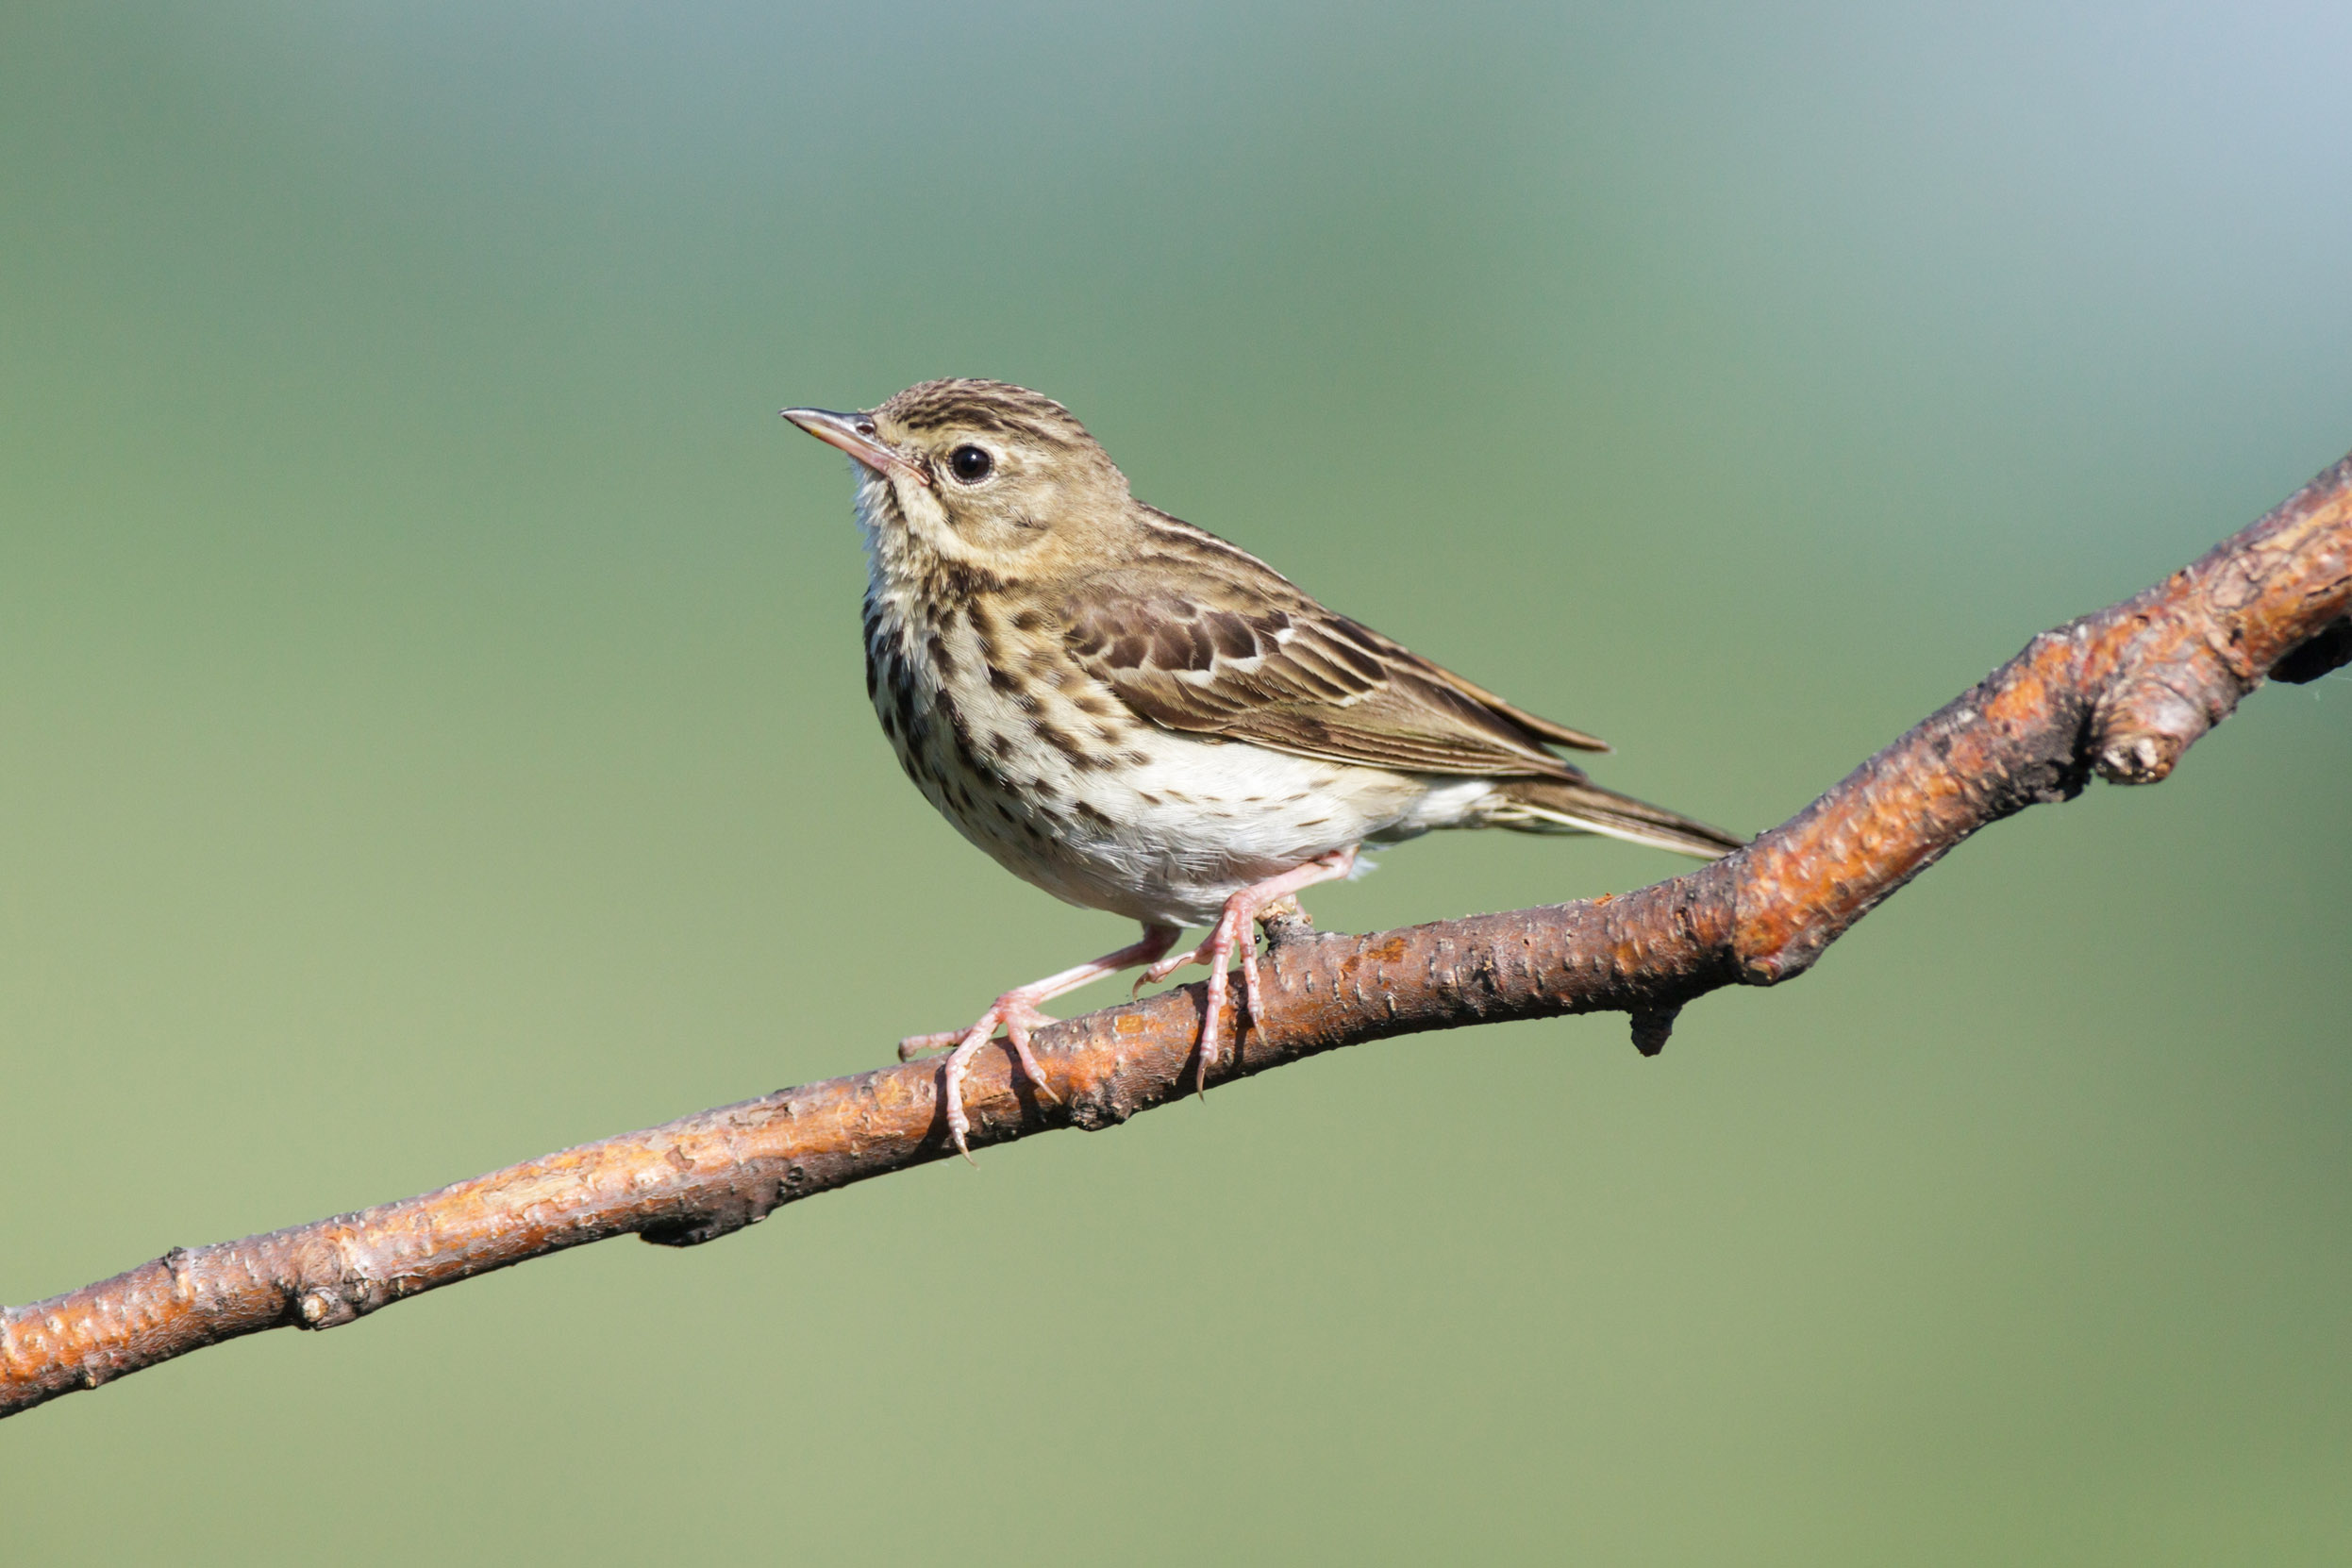 A lone Tree Pipit perched on a branch.